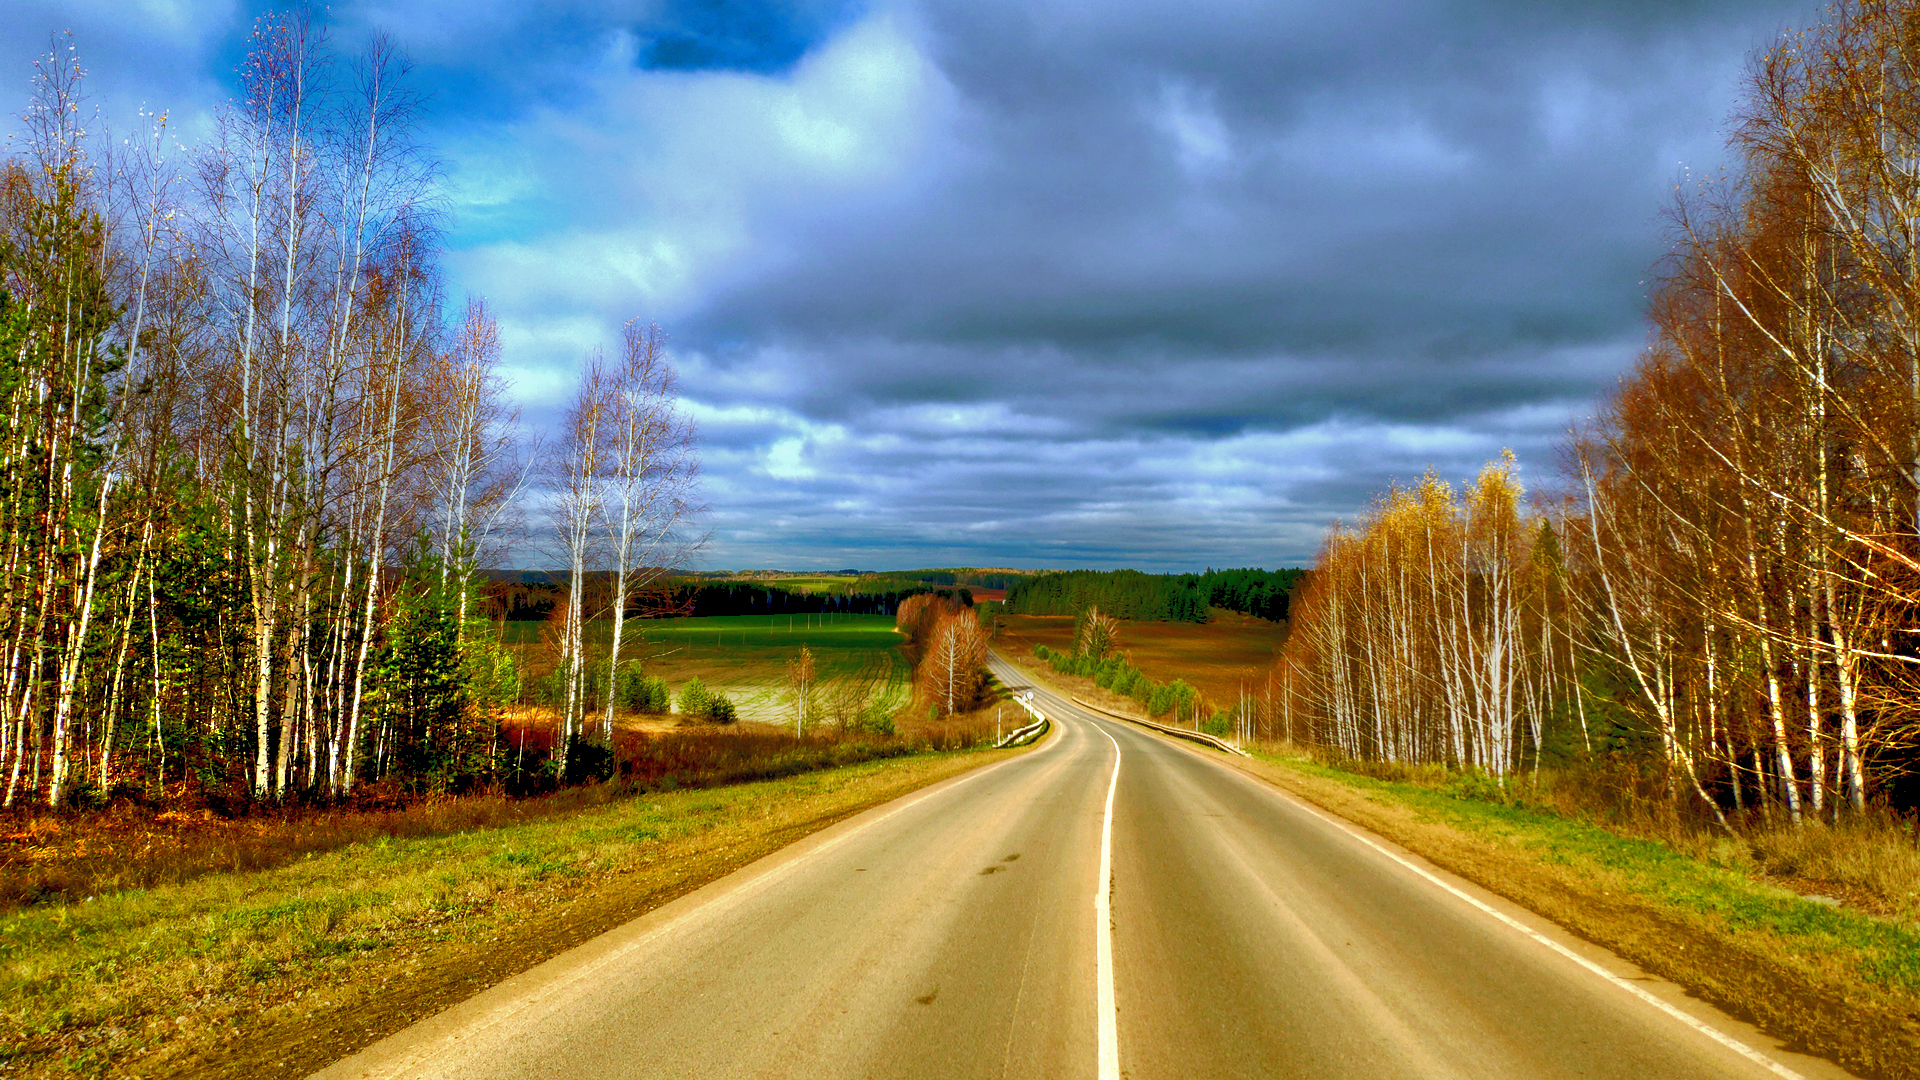 General 1920x1080 road sky trees clouds landscape fall HDR